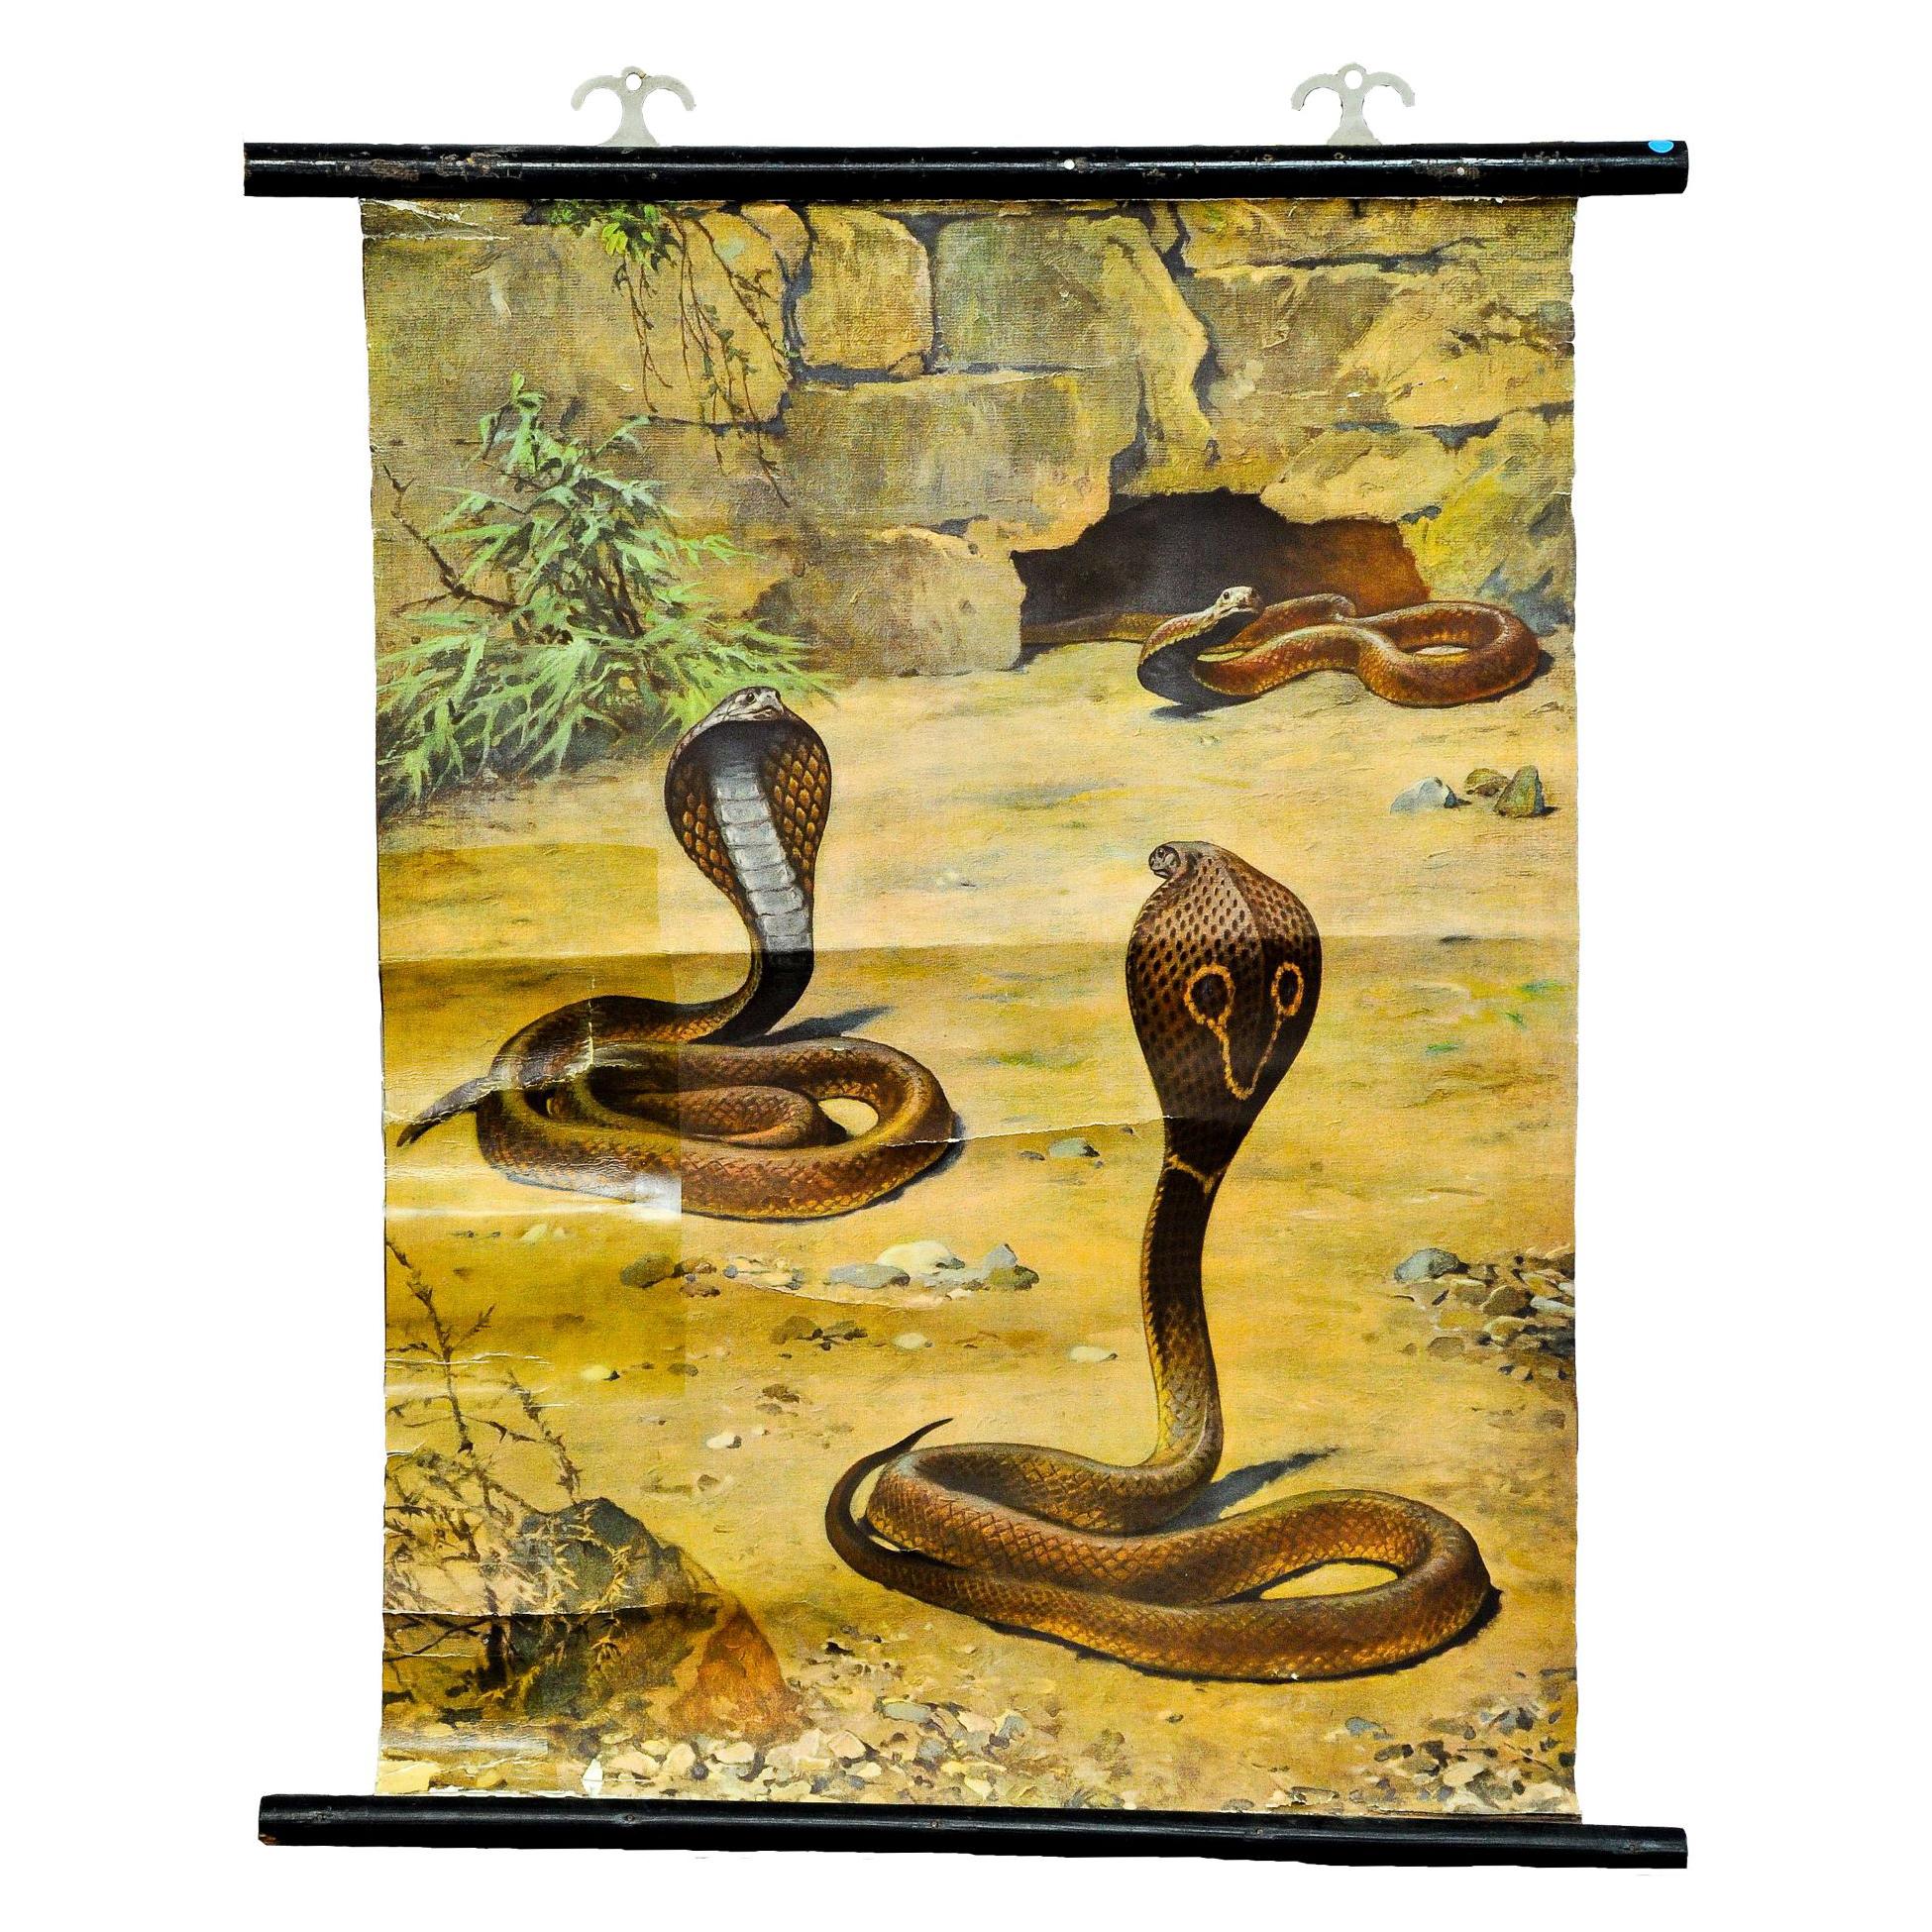 Old Mural Countrycore Pull-Down Wallchart Scenery with Cobras Snake Poster Print For Sale